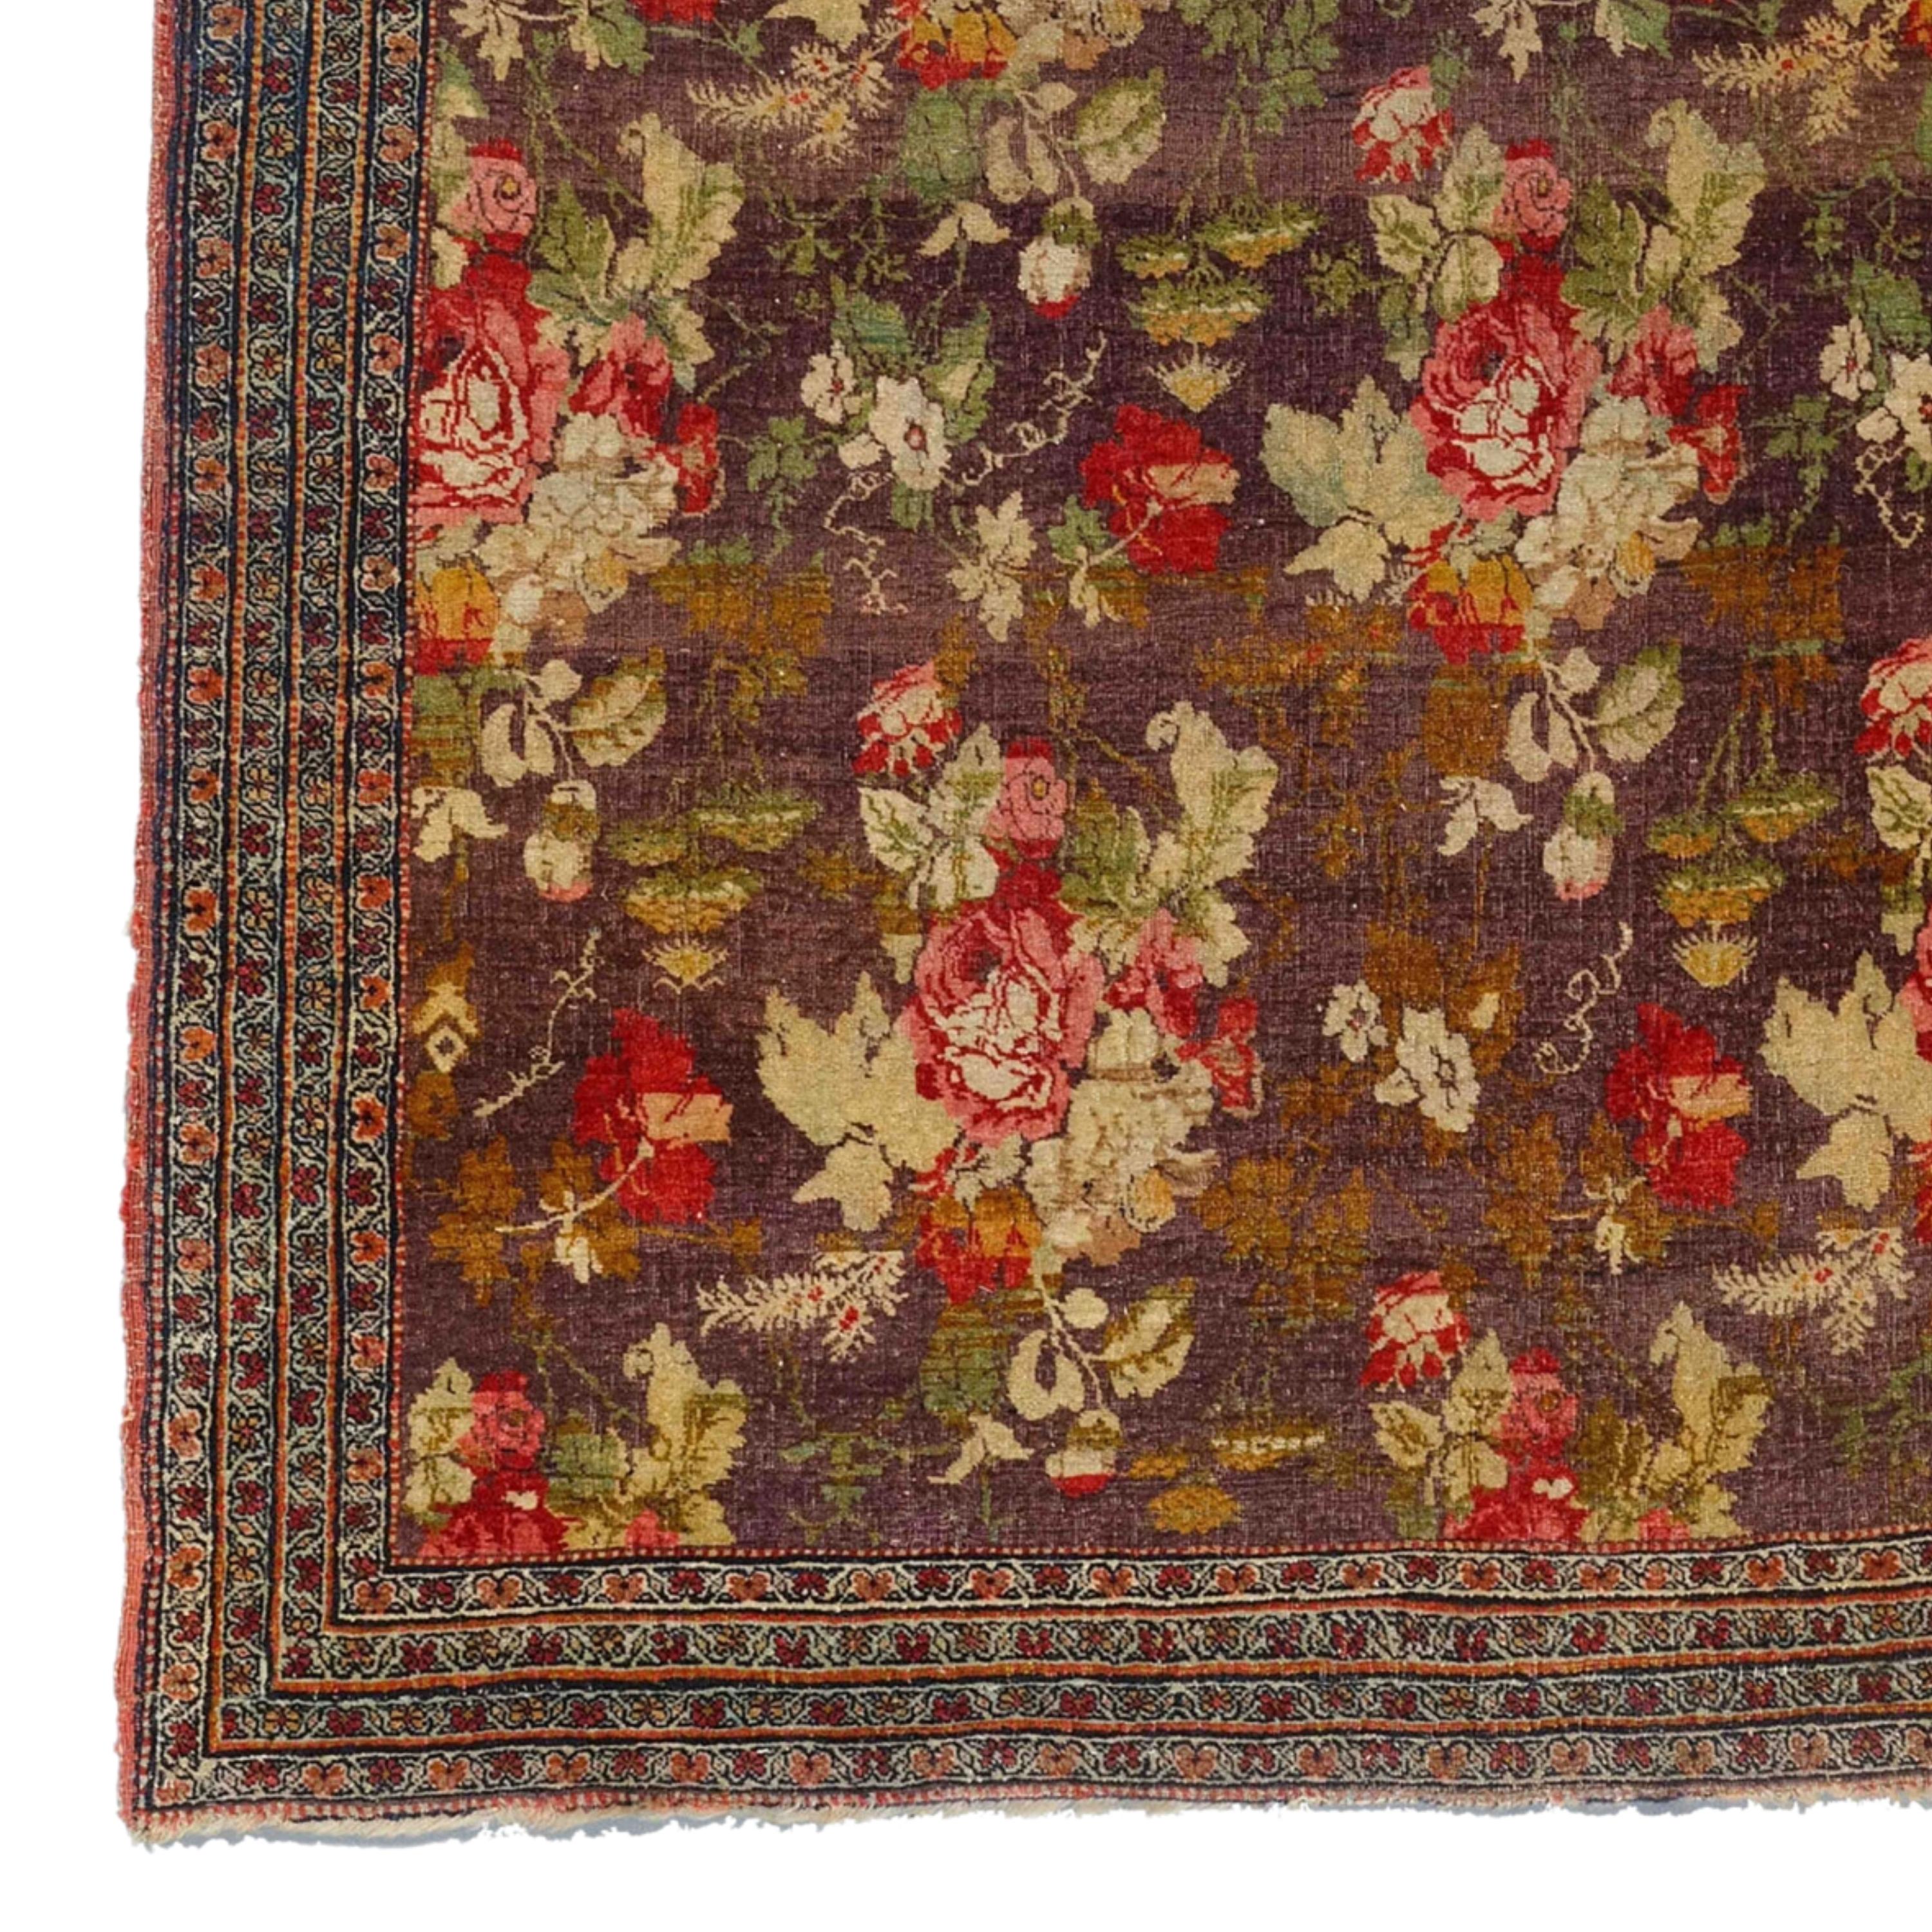 Middle of 19th Century Bidjar Rug
Antique Bidjar Rug  Size : 120 x 193 cm

This wonderful carpet will fascinate you with its intricate designs and vibrant colors that reflect the rich history and craftsmanship of the period. Each stitch tells the